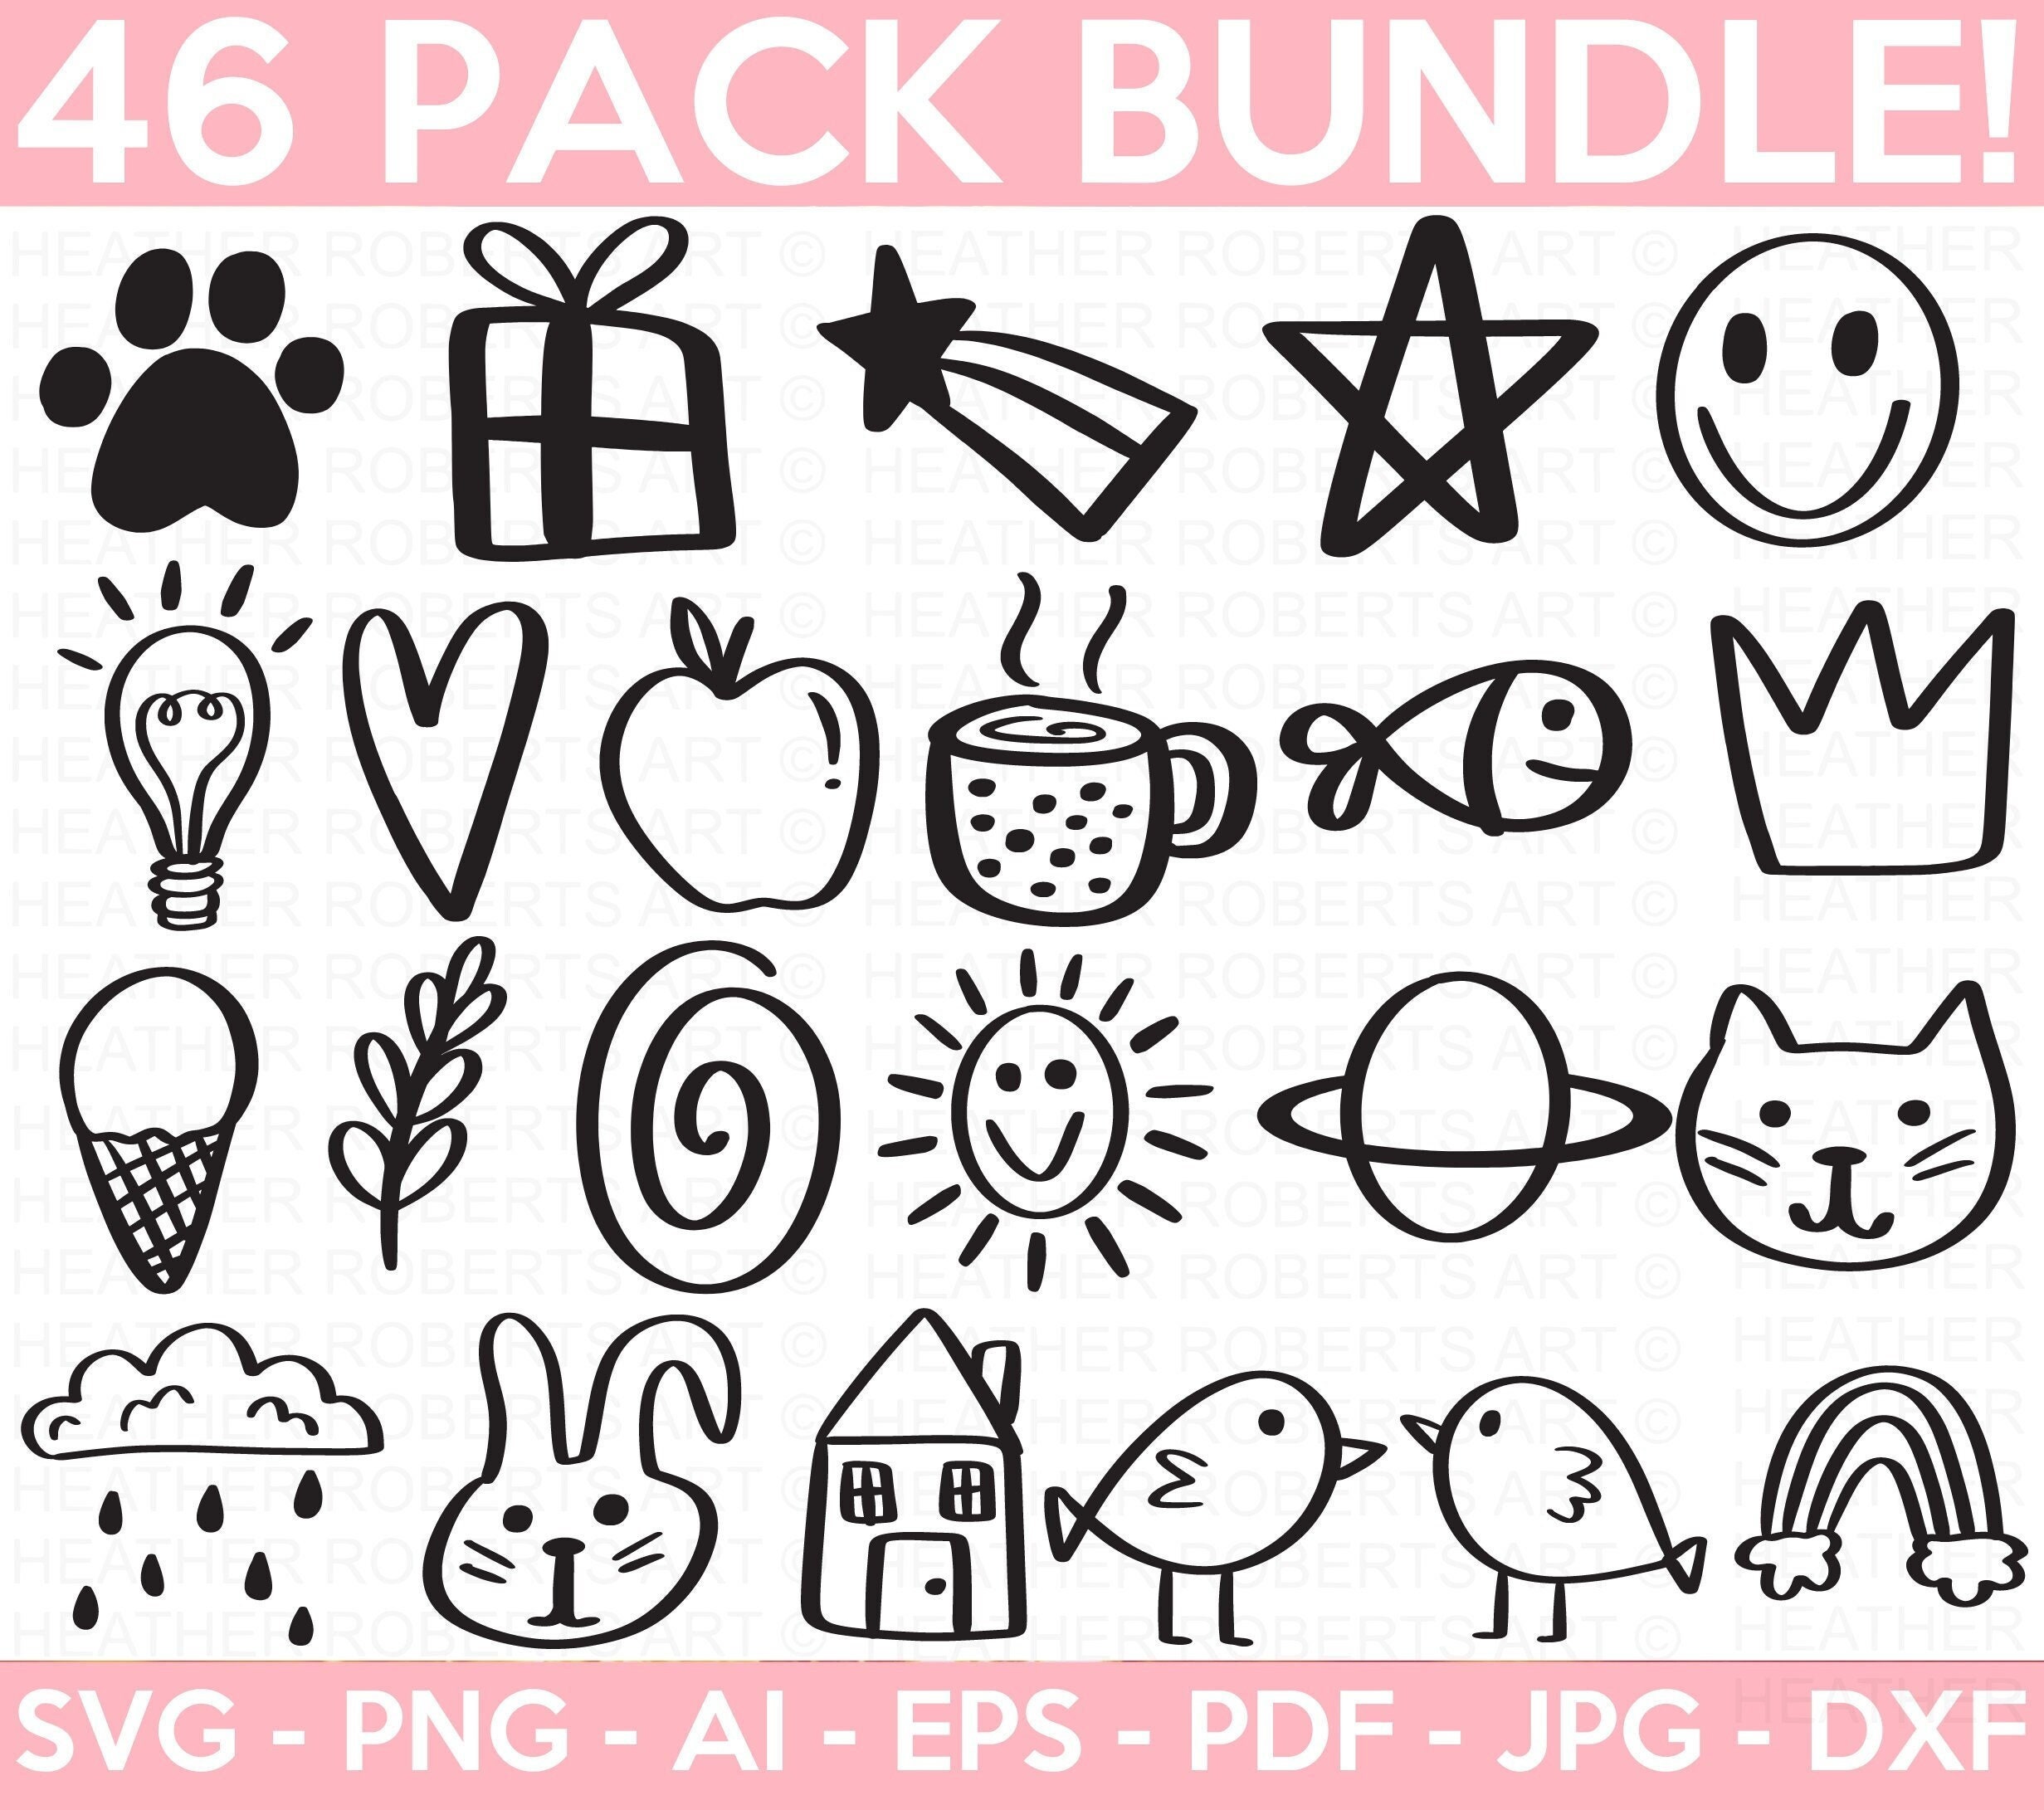 A Set Of 11 Cute And Colorful Art Supply Icons Royalty Free SVG